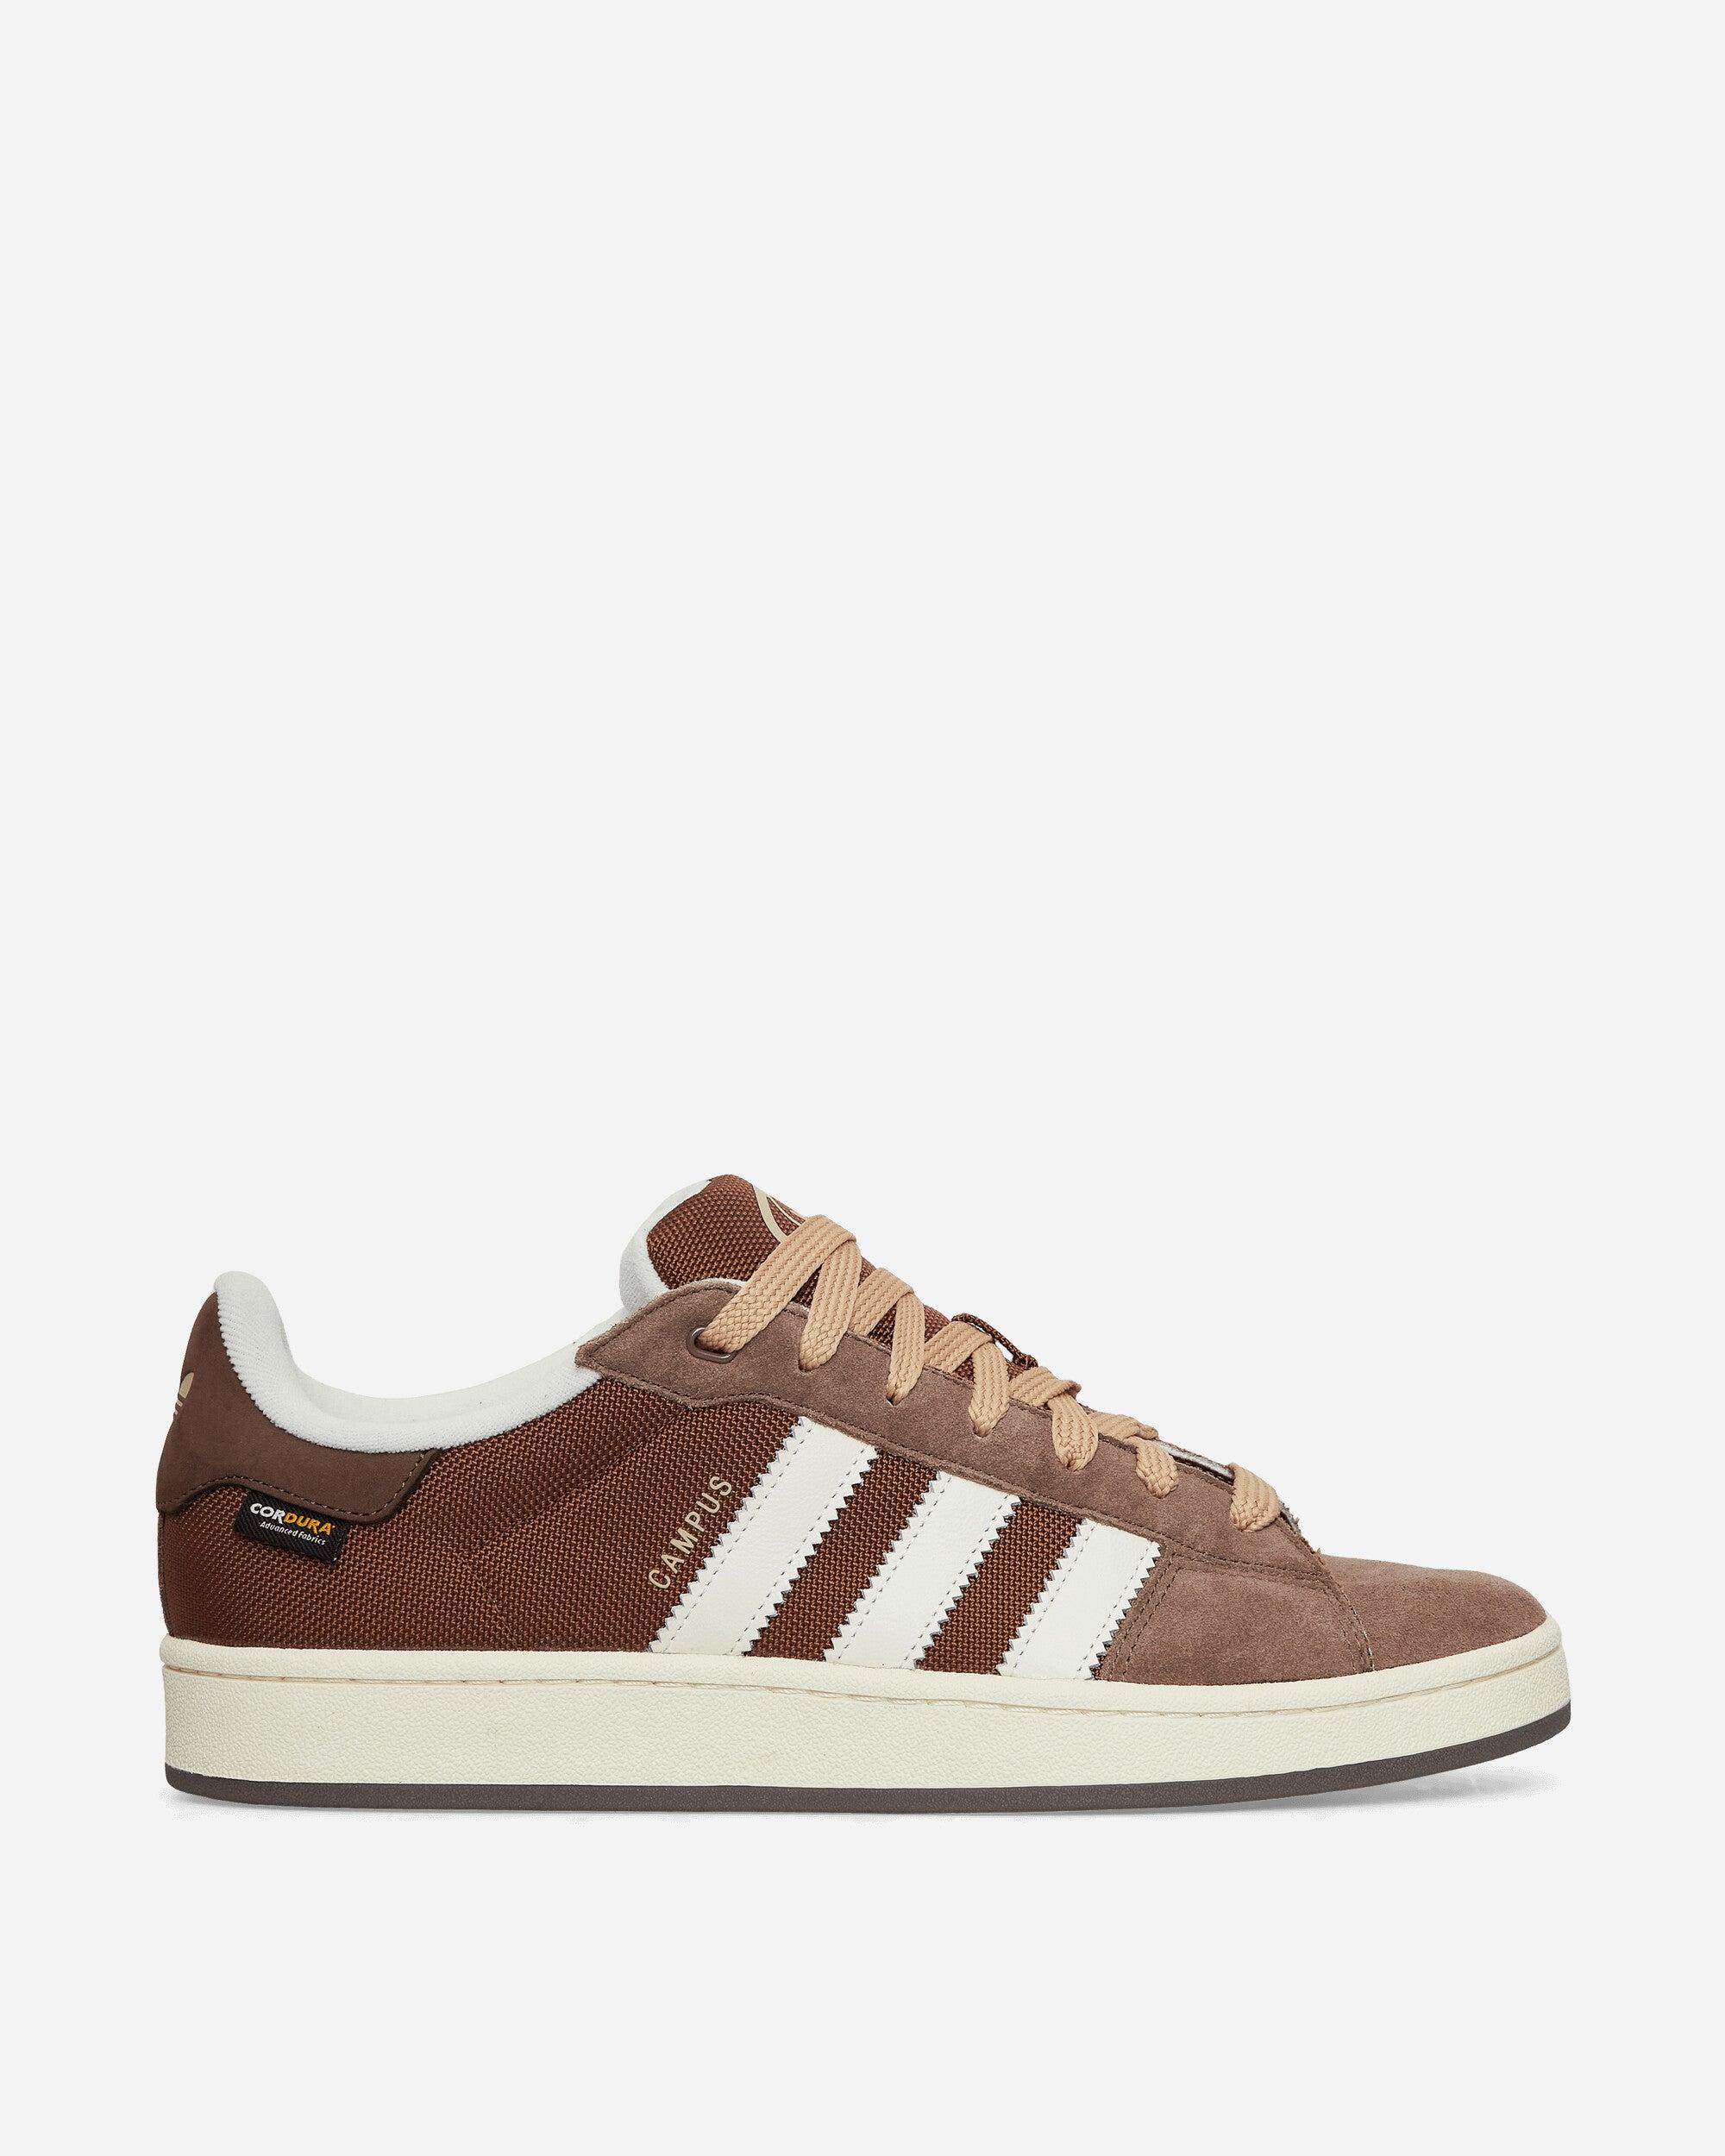 adidas / for Off | Preloved Men Brown Strata / Sneaker 00s White Campus Earth Lyst